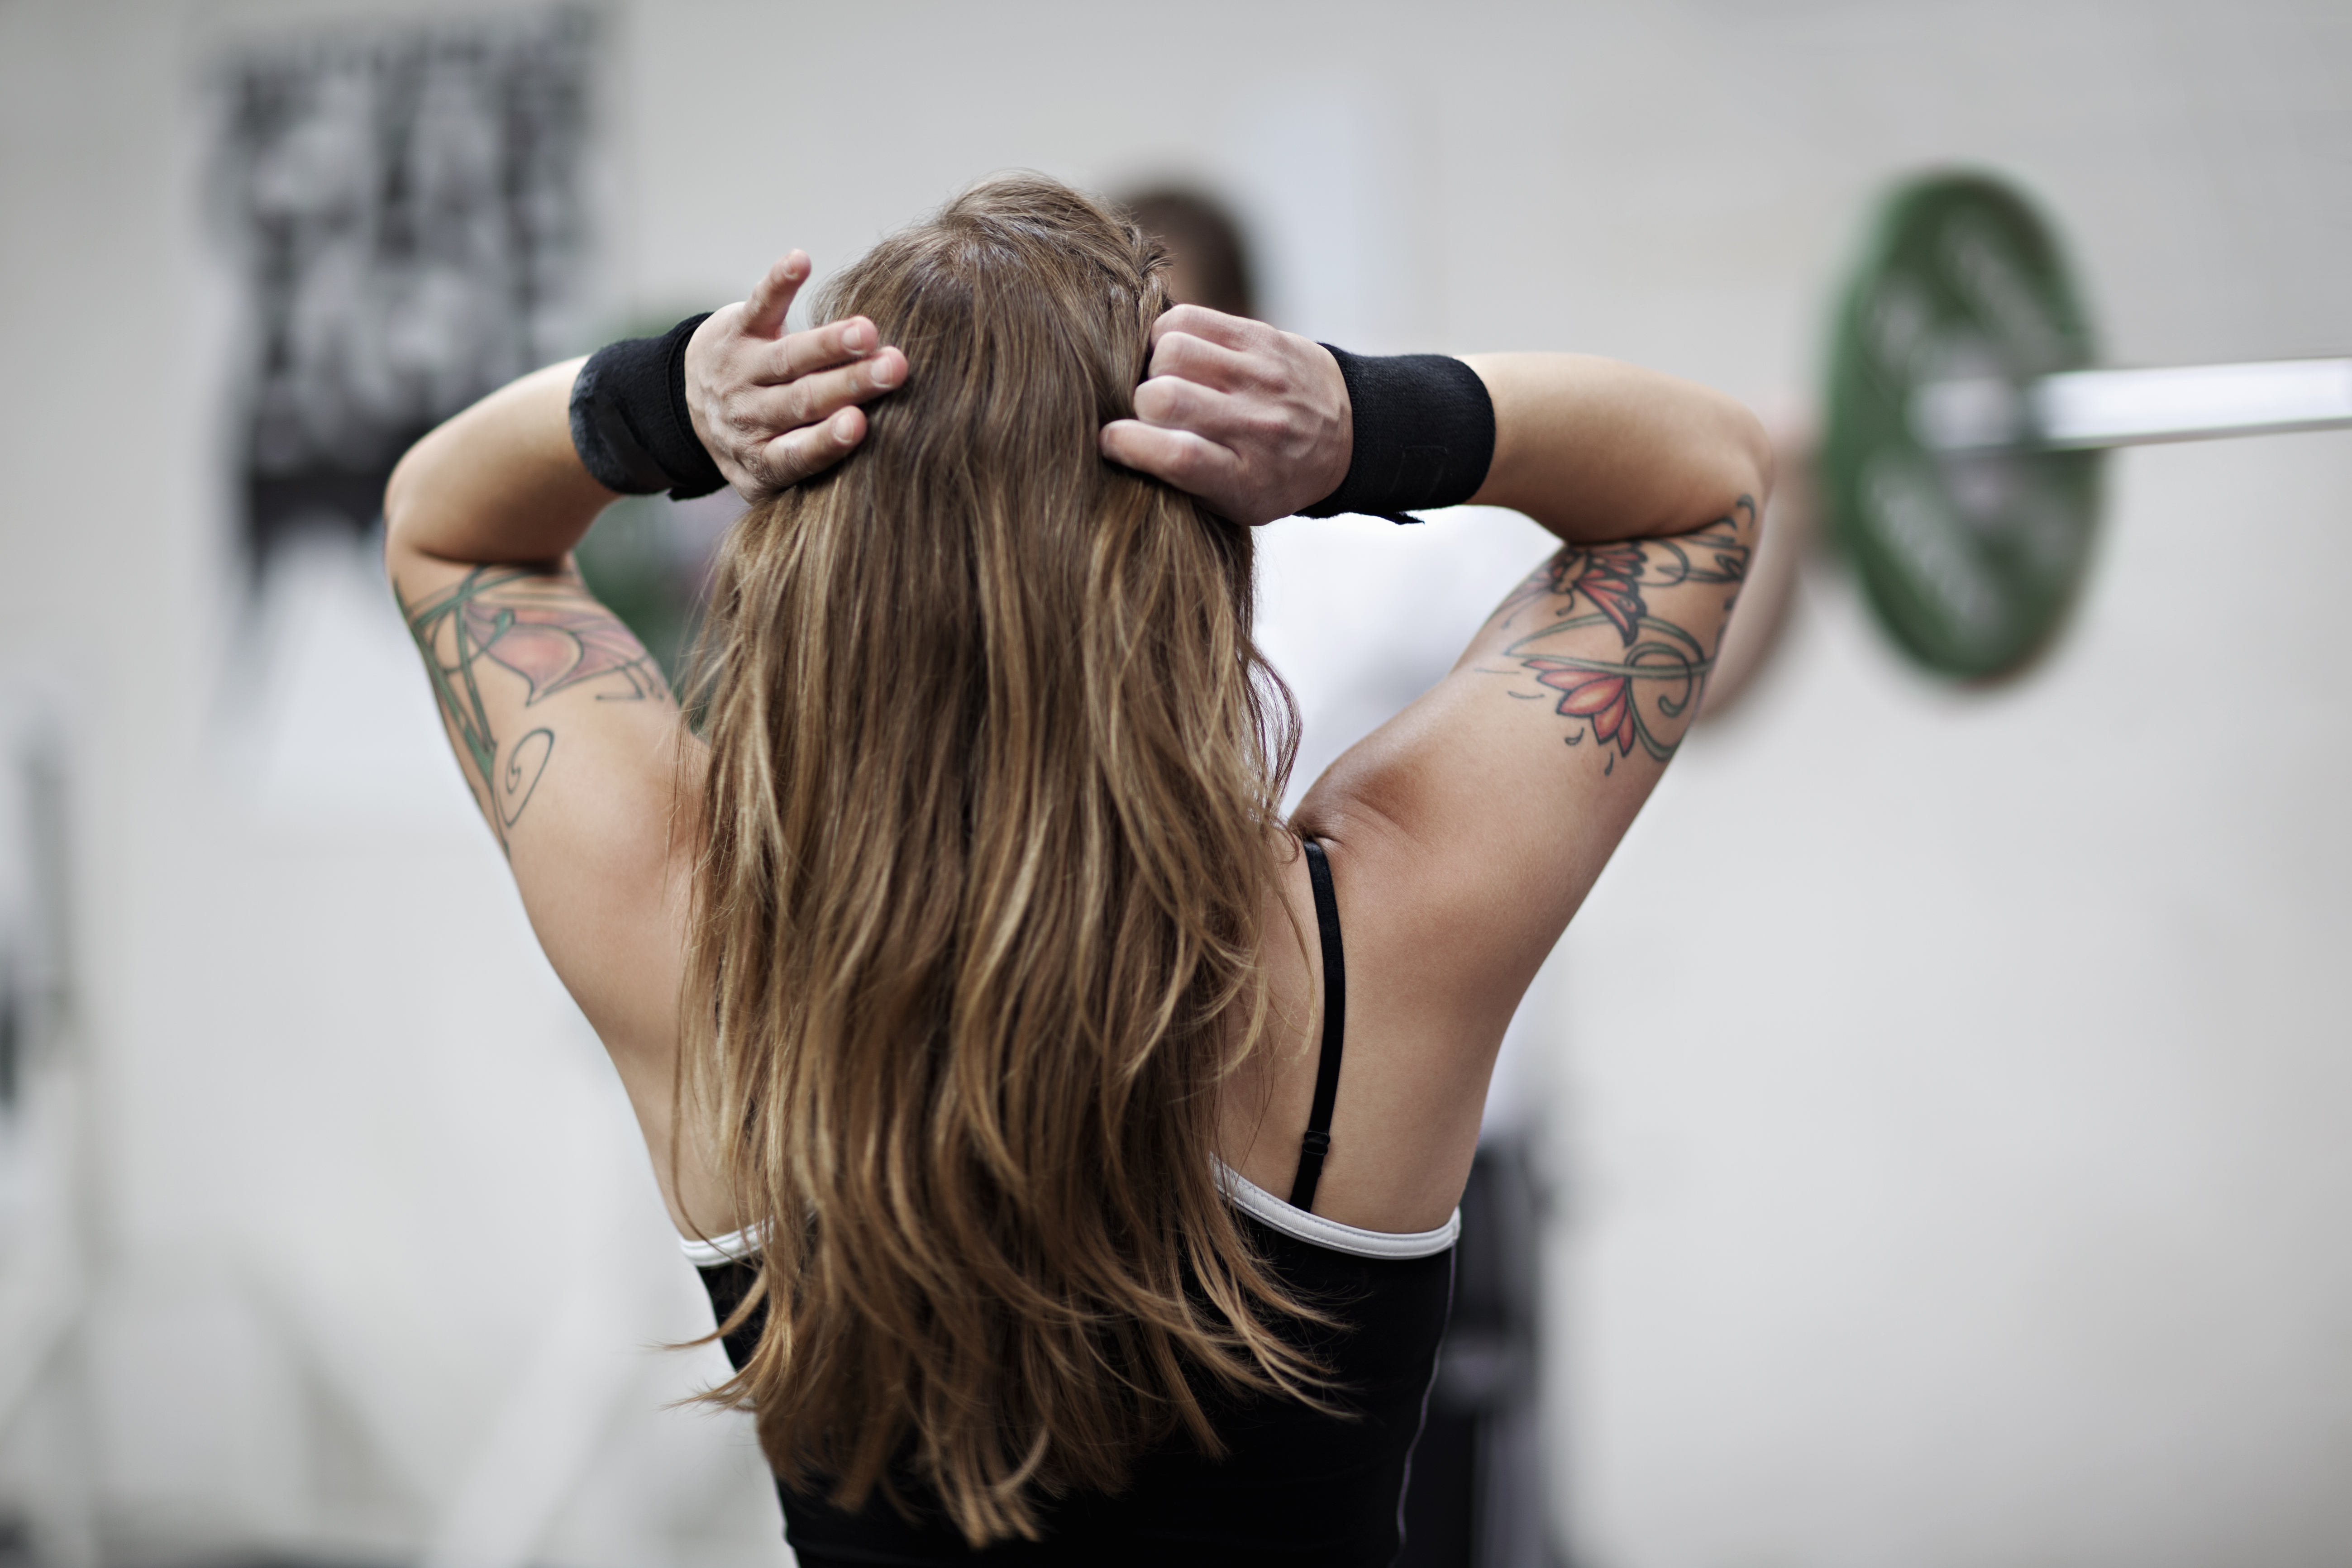 Do Tattoos Stretch With Muscle Growth?